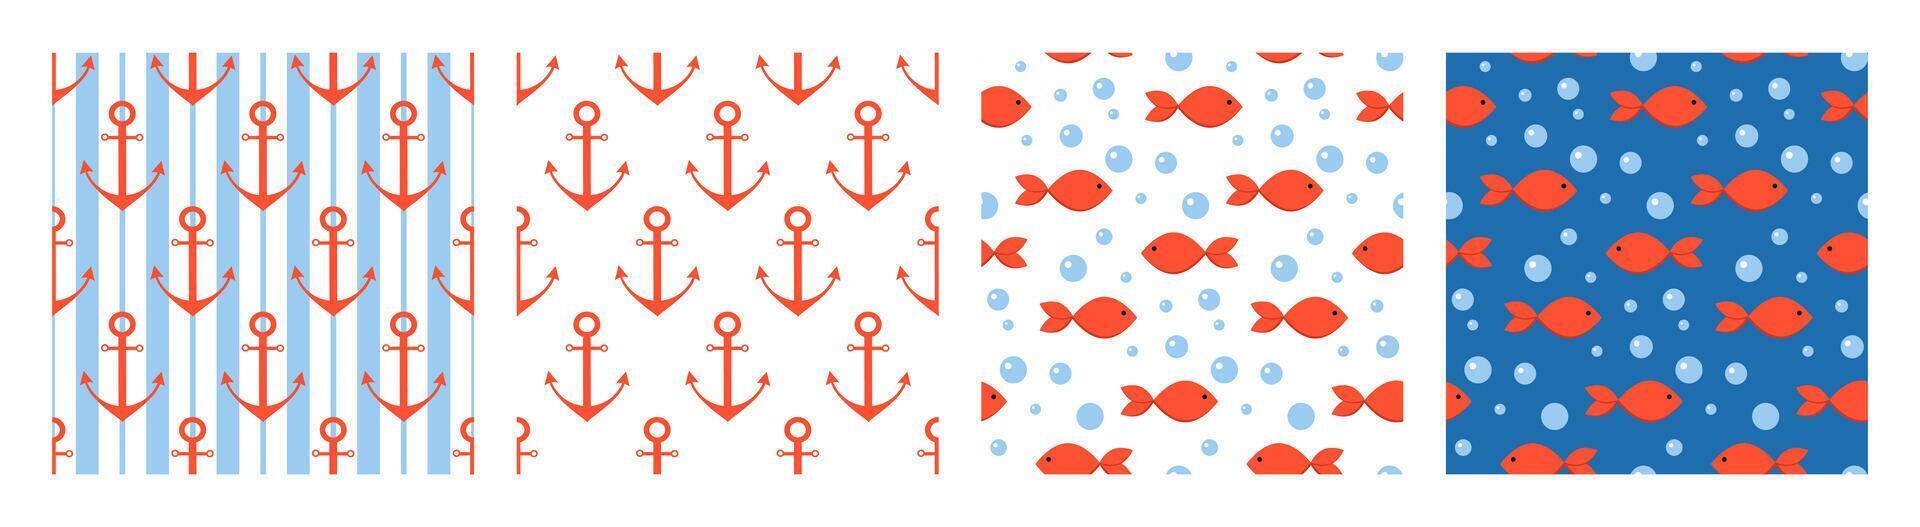 Cute seamless pattern set in navy and marine simple style. Minimalistic fishes, anchors and stripes background vector